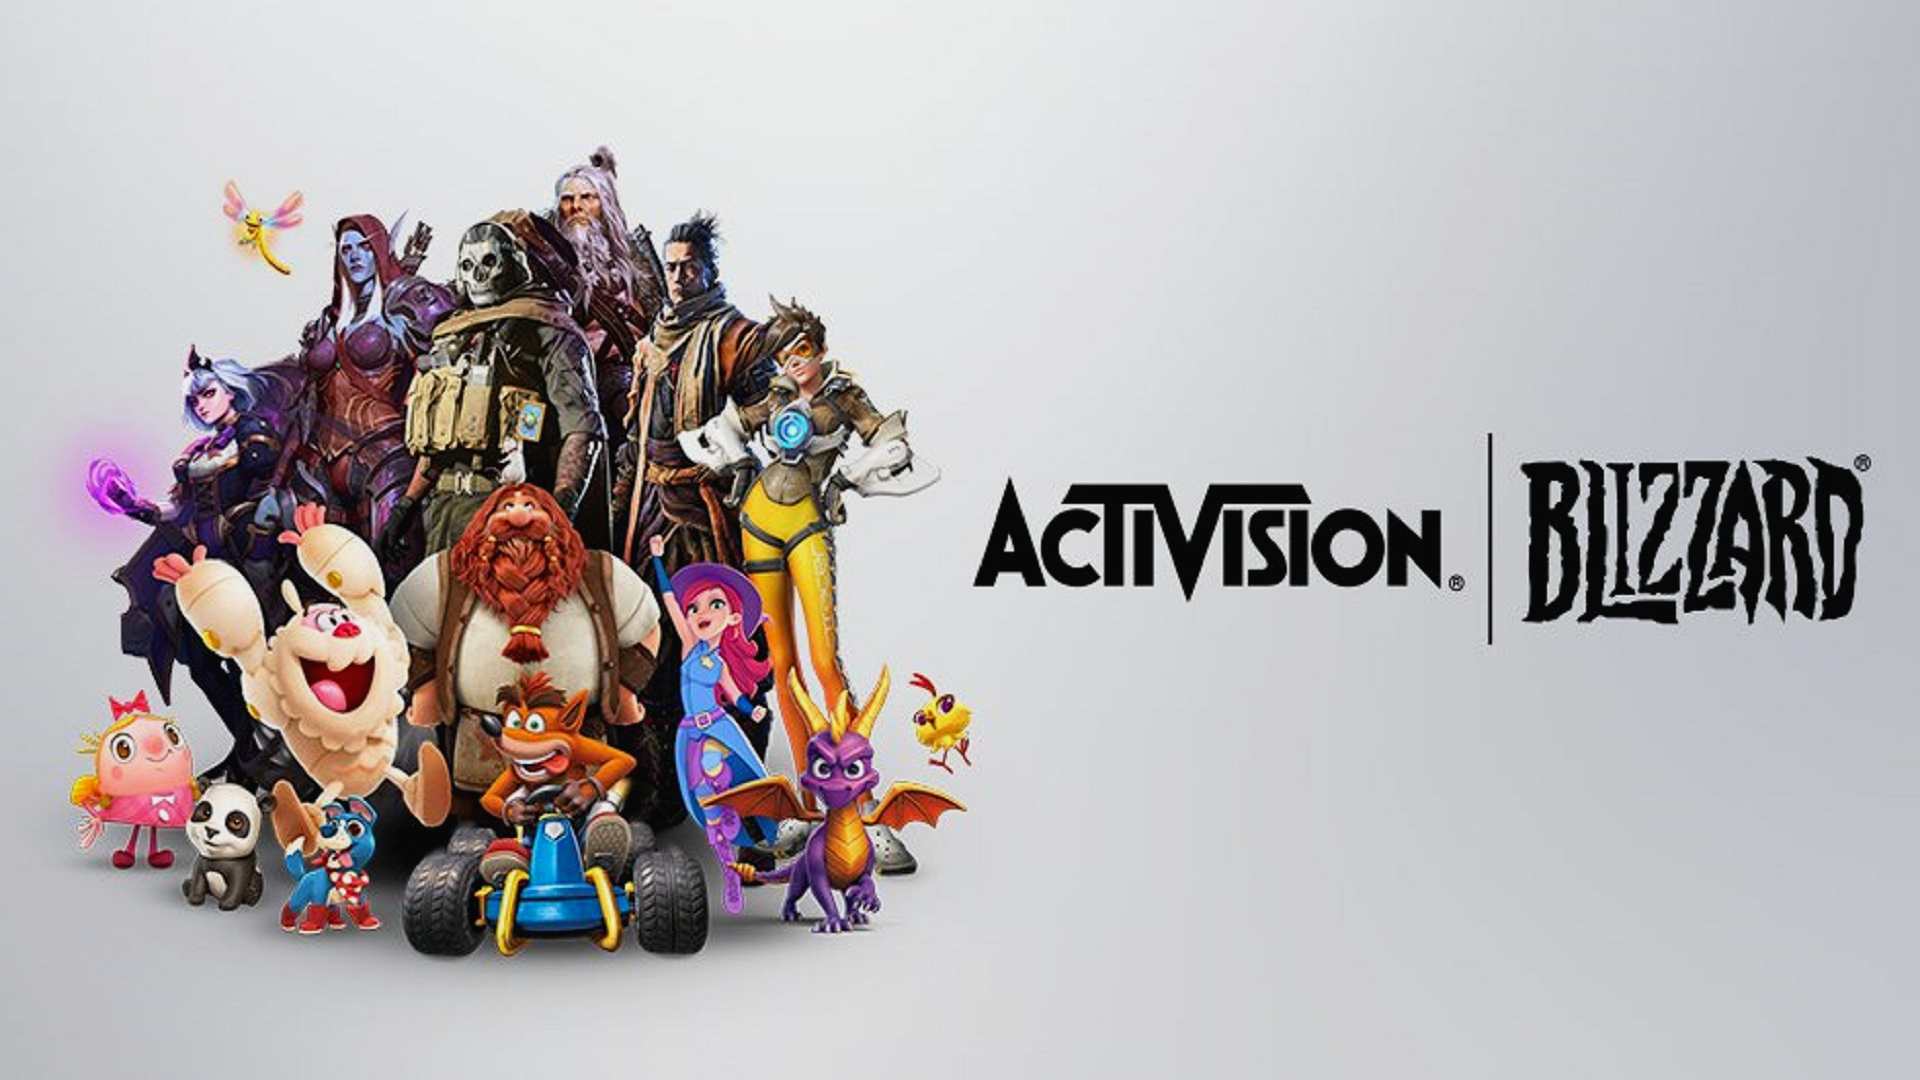 Microsoft-Activision merger would bring a catalogue of games to a wider audience